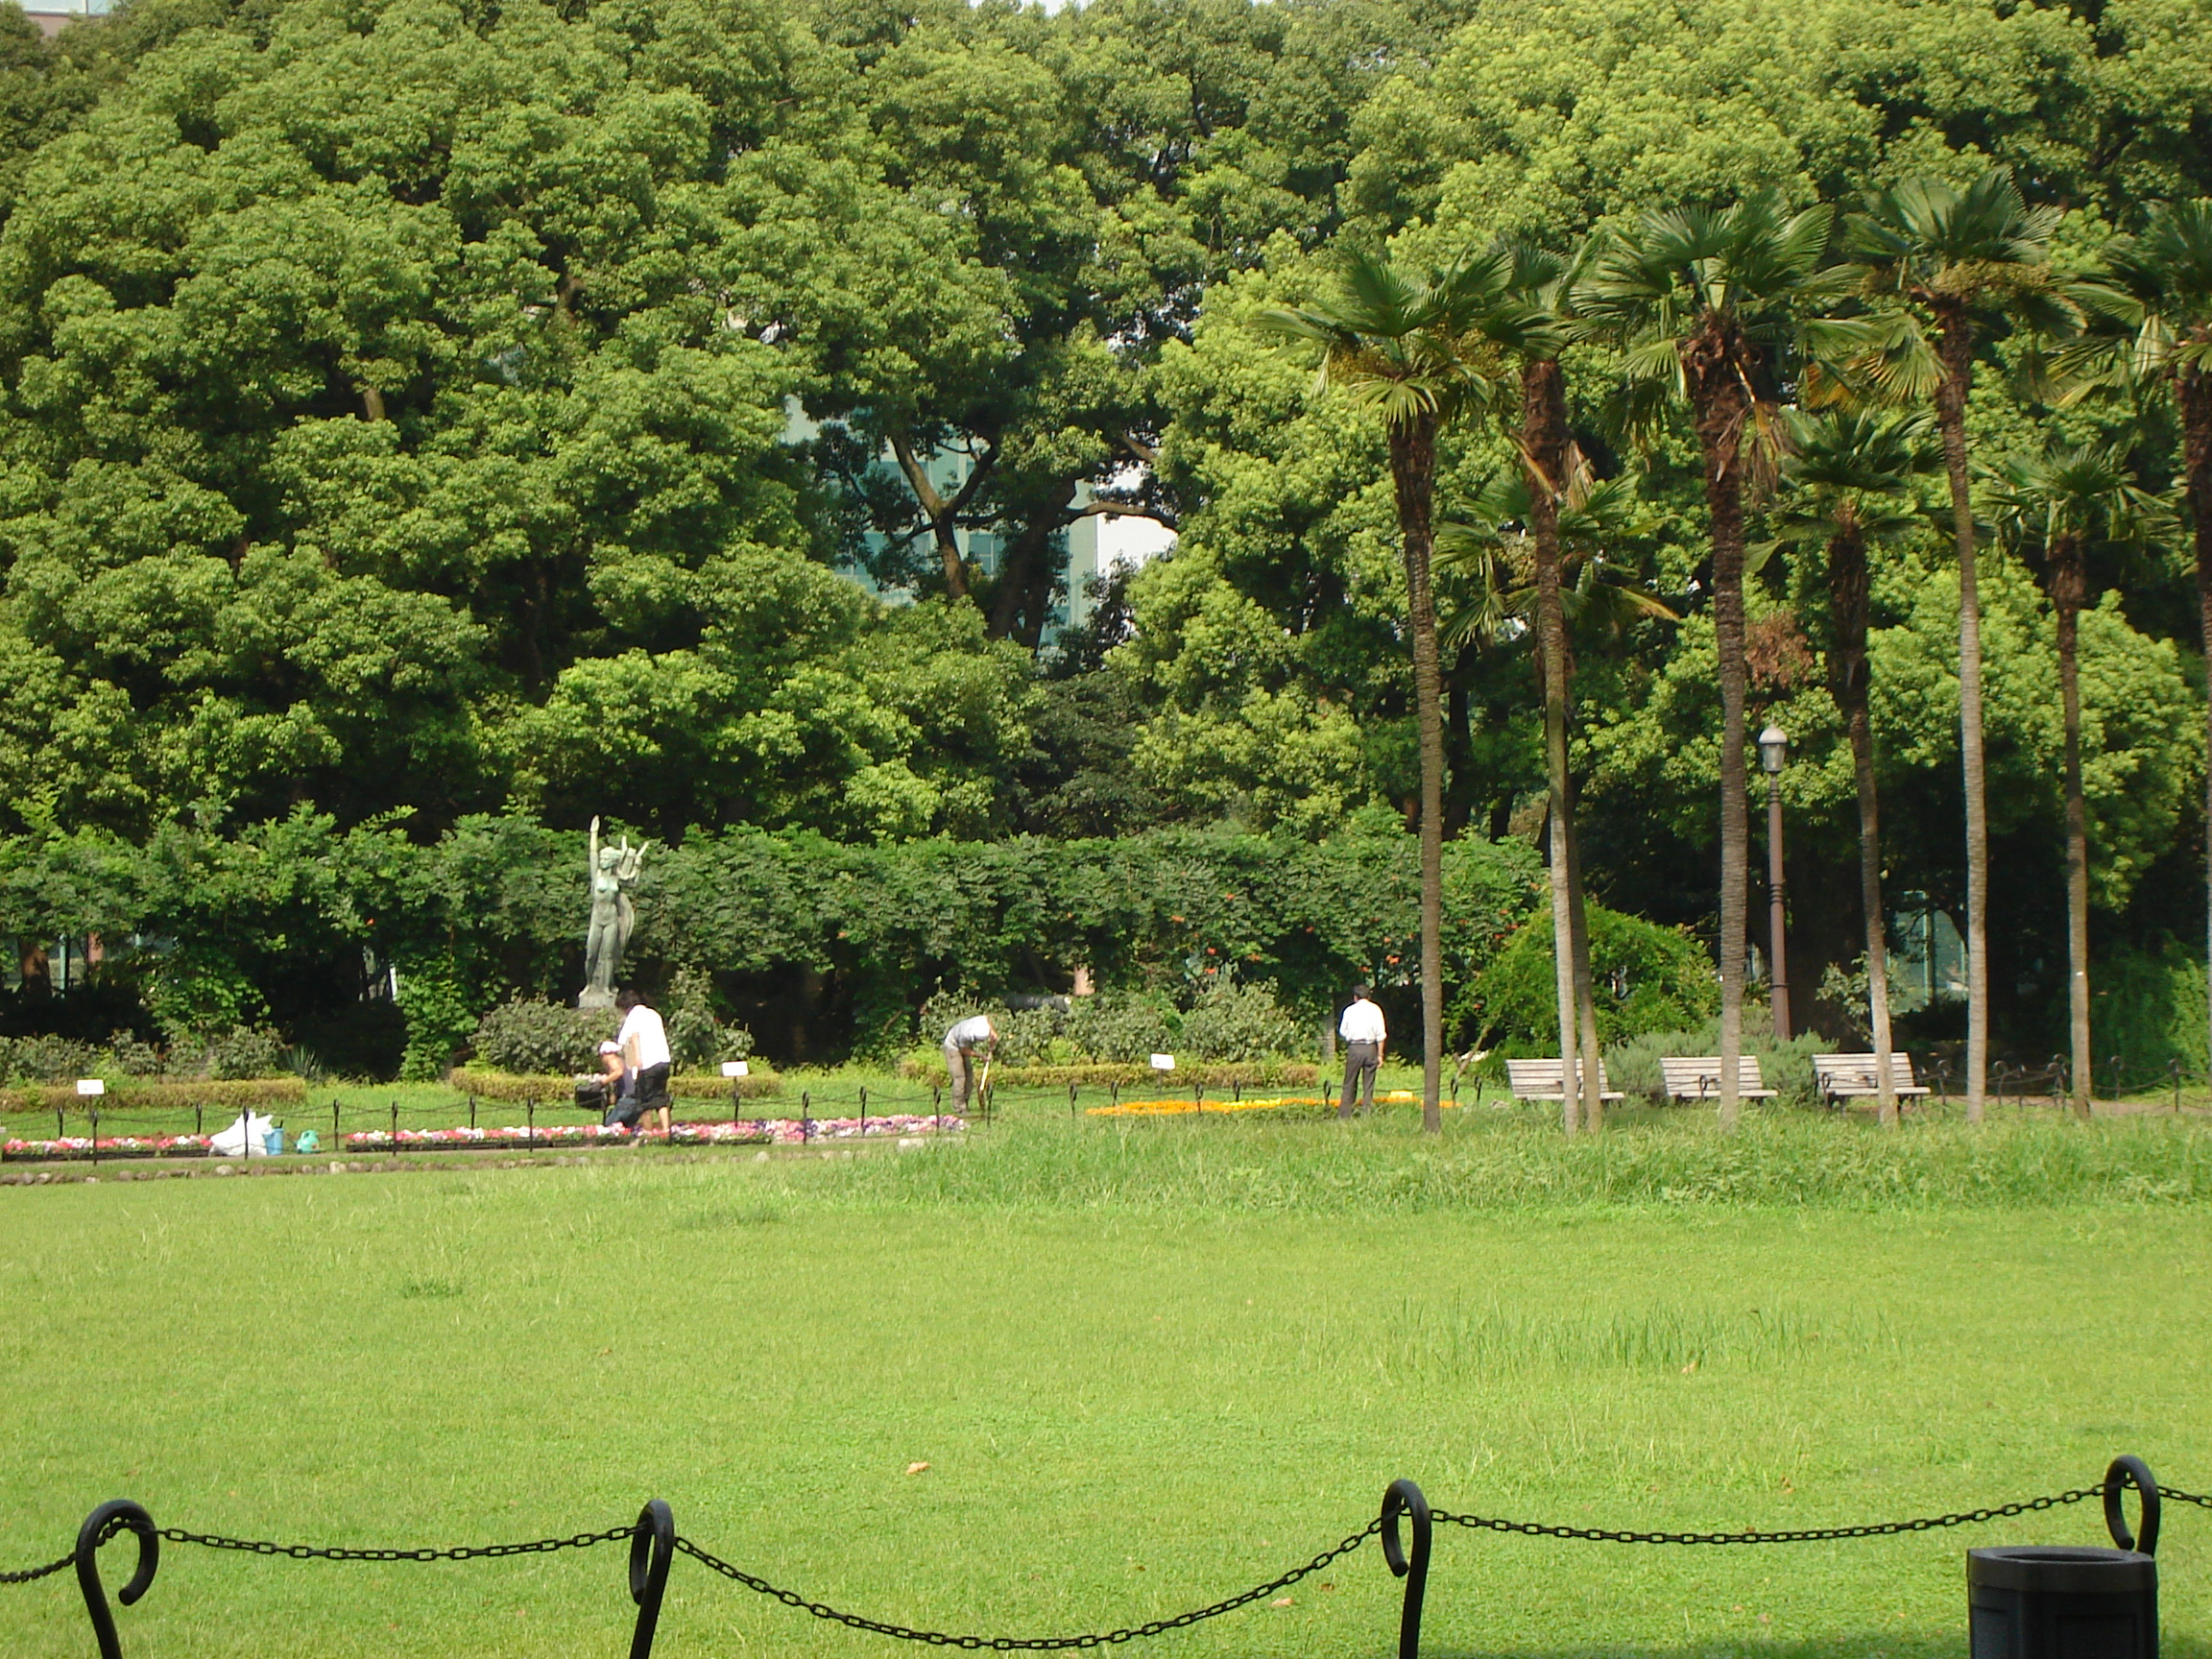 a grassy area with large trees in the background